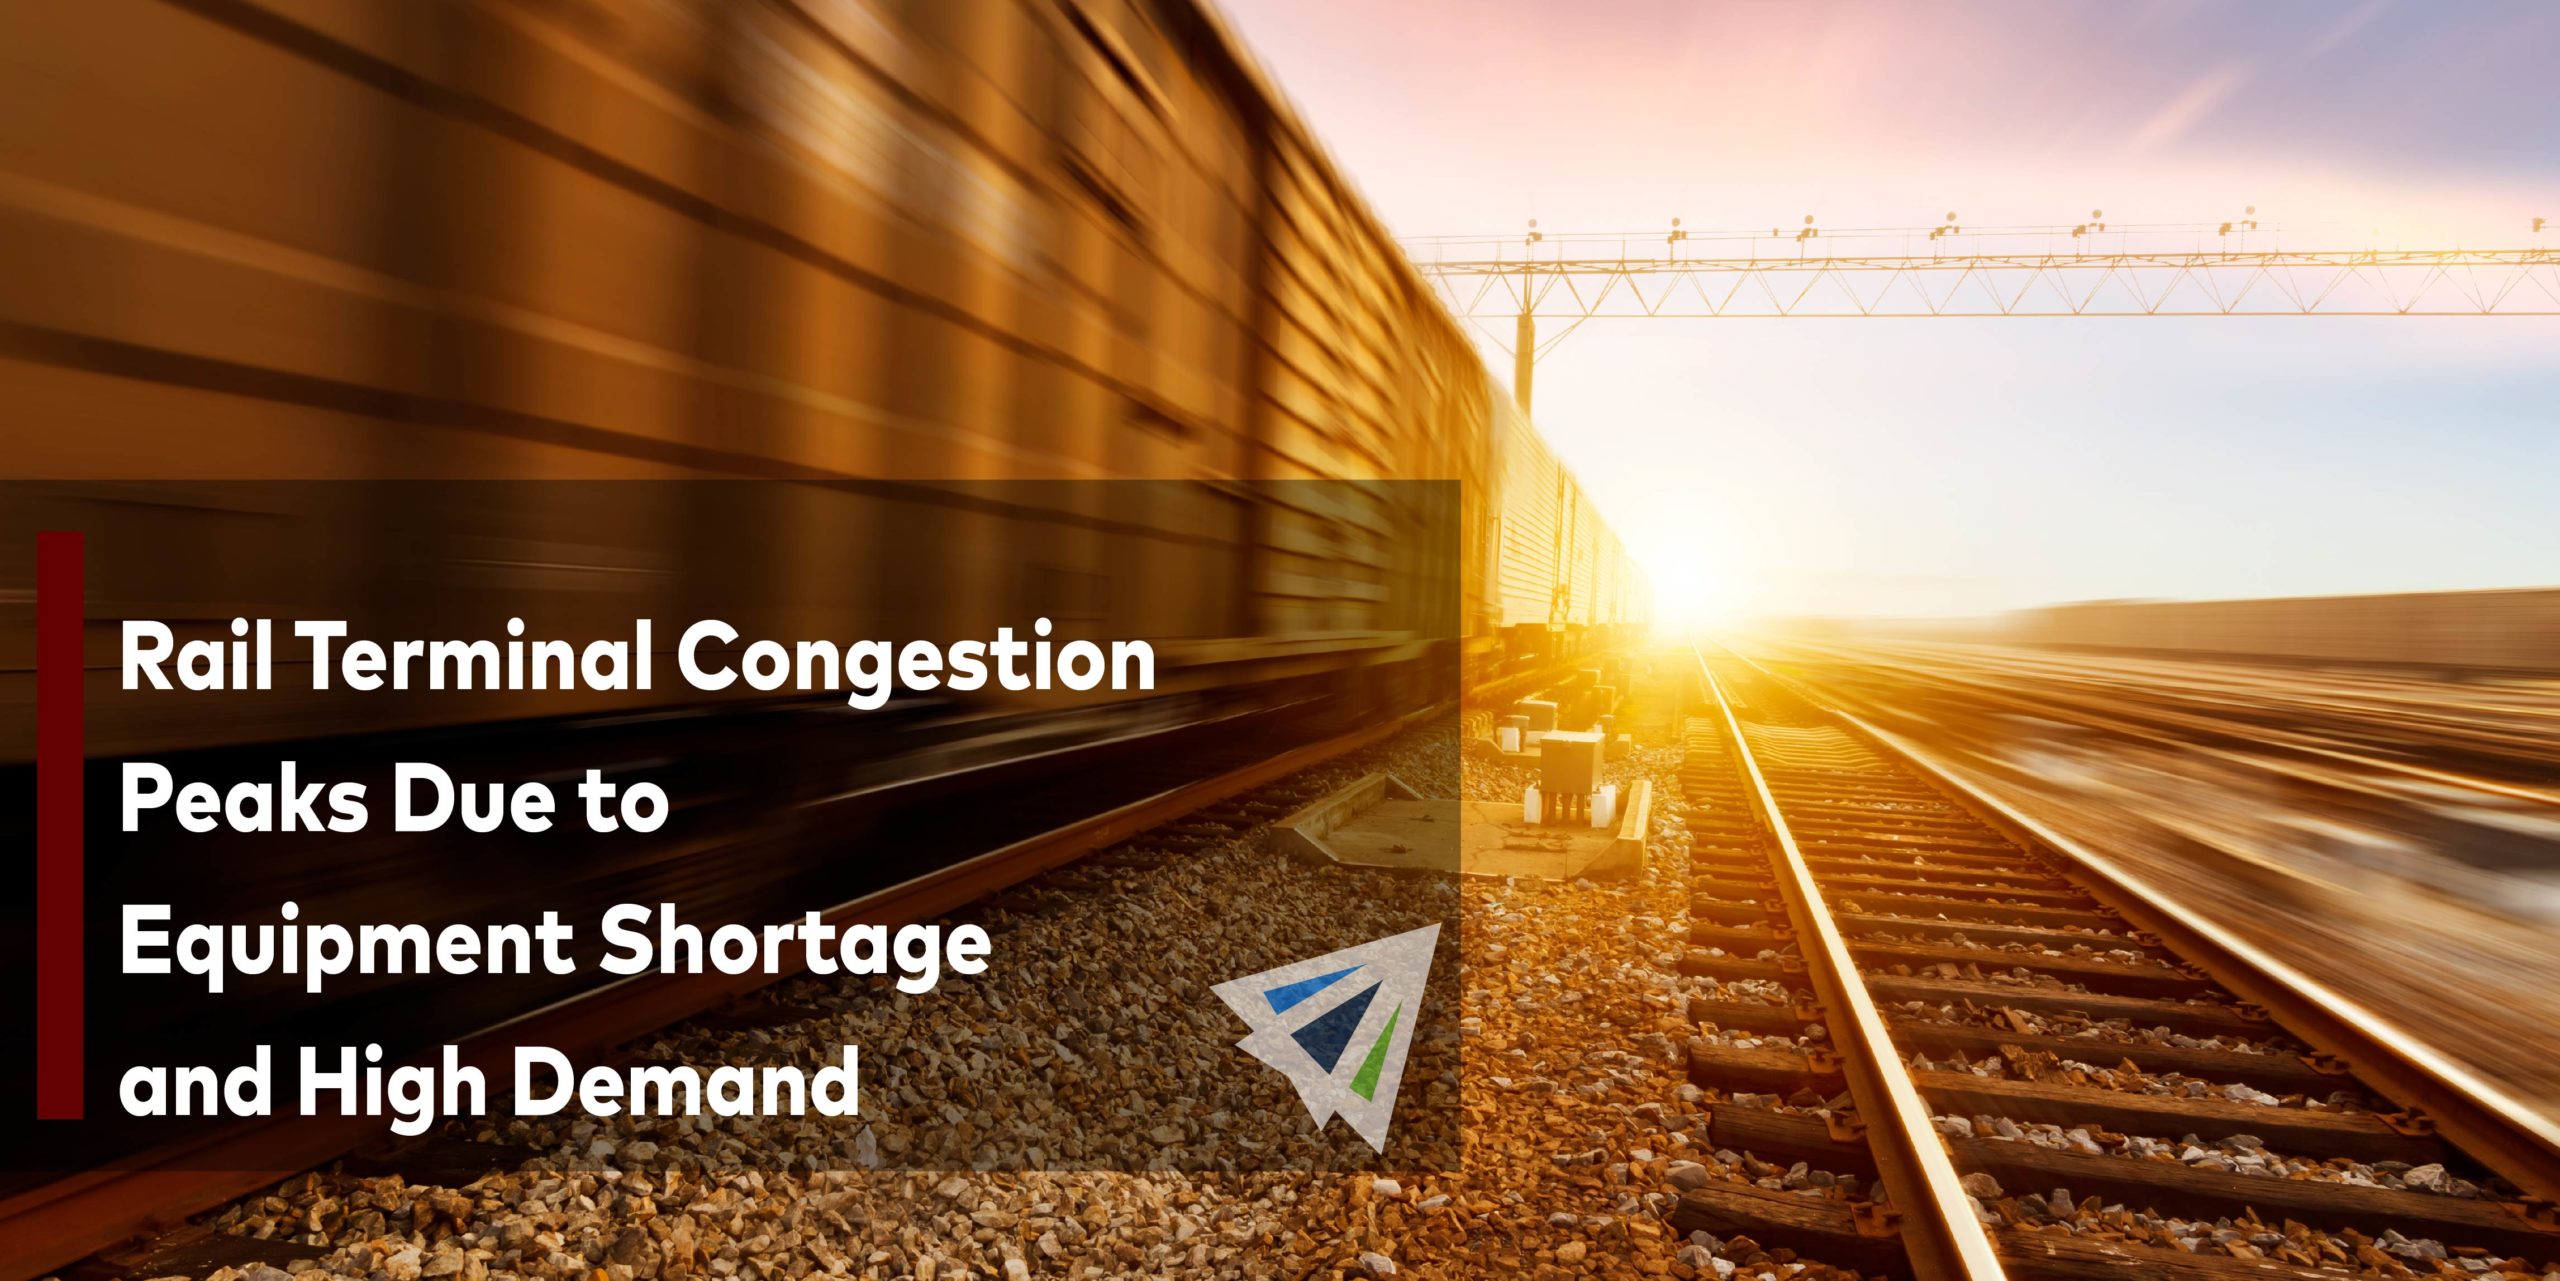 Rail Terminal Congestion Peaks Due to Equipment Shortage and High Demand